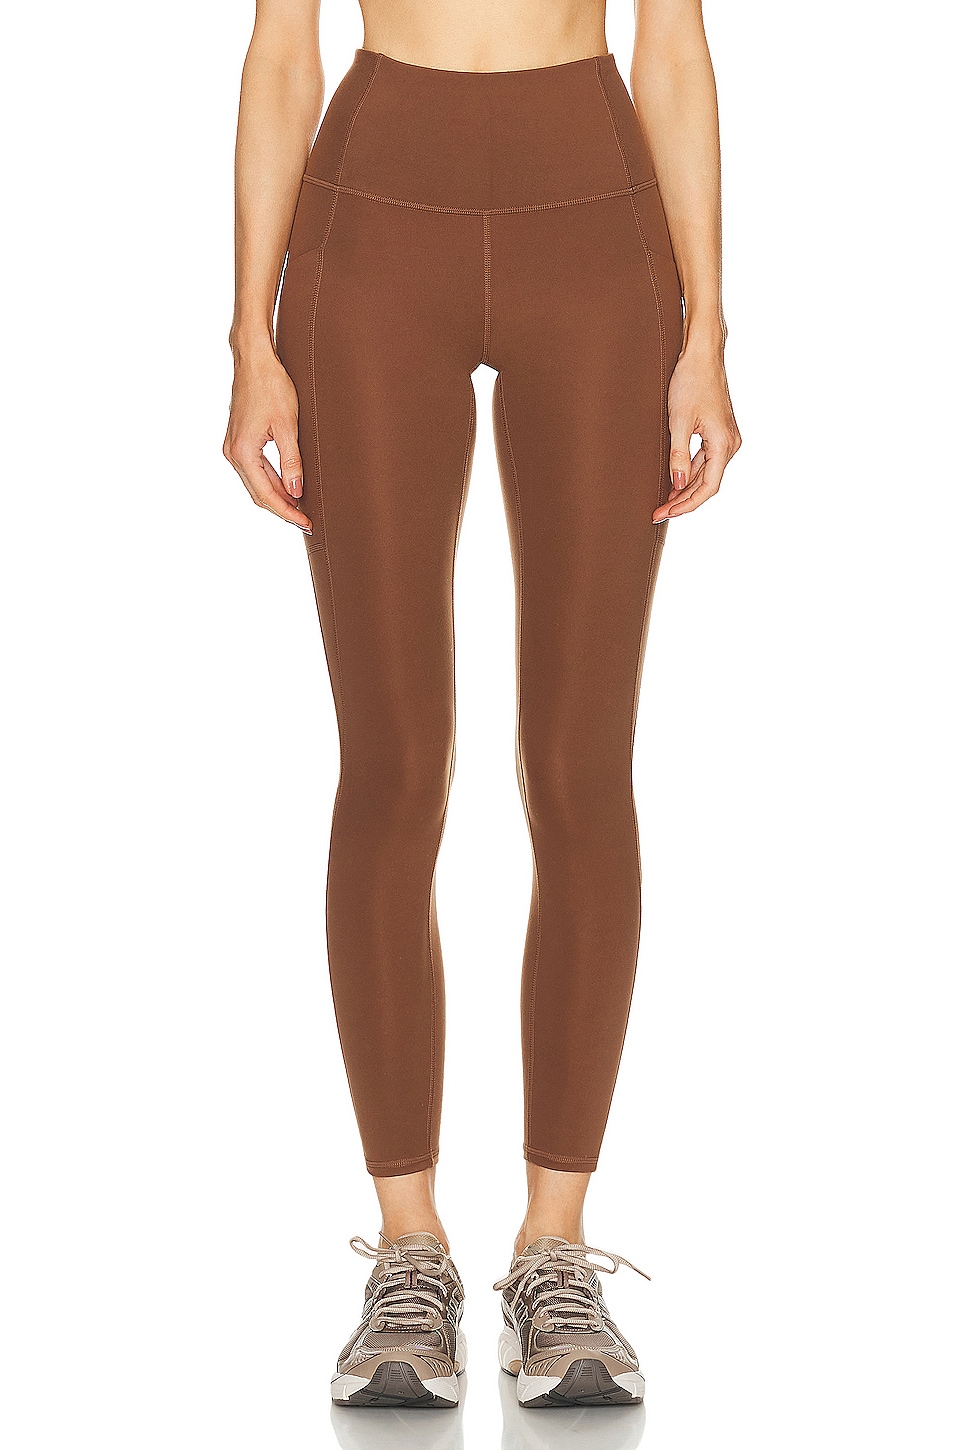 Image 1 of Varley Move Pocket High 25 Legging in Cocoa Brown